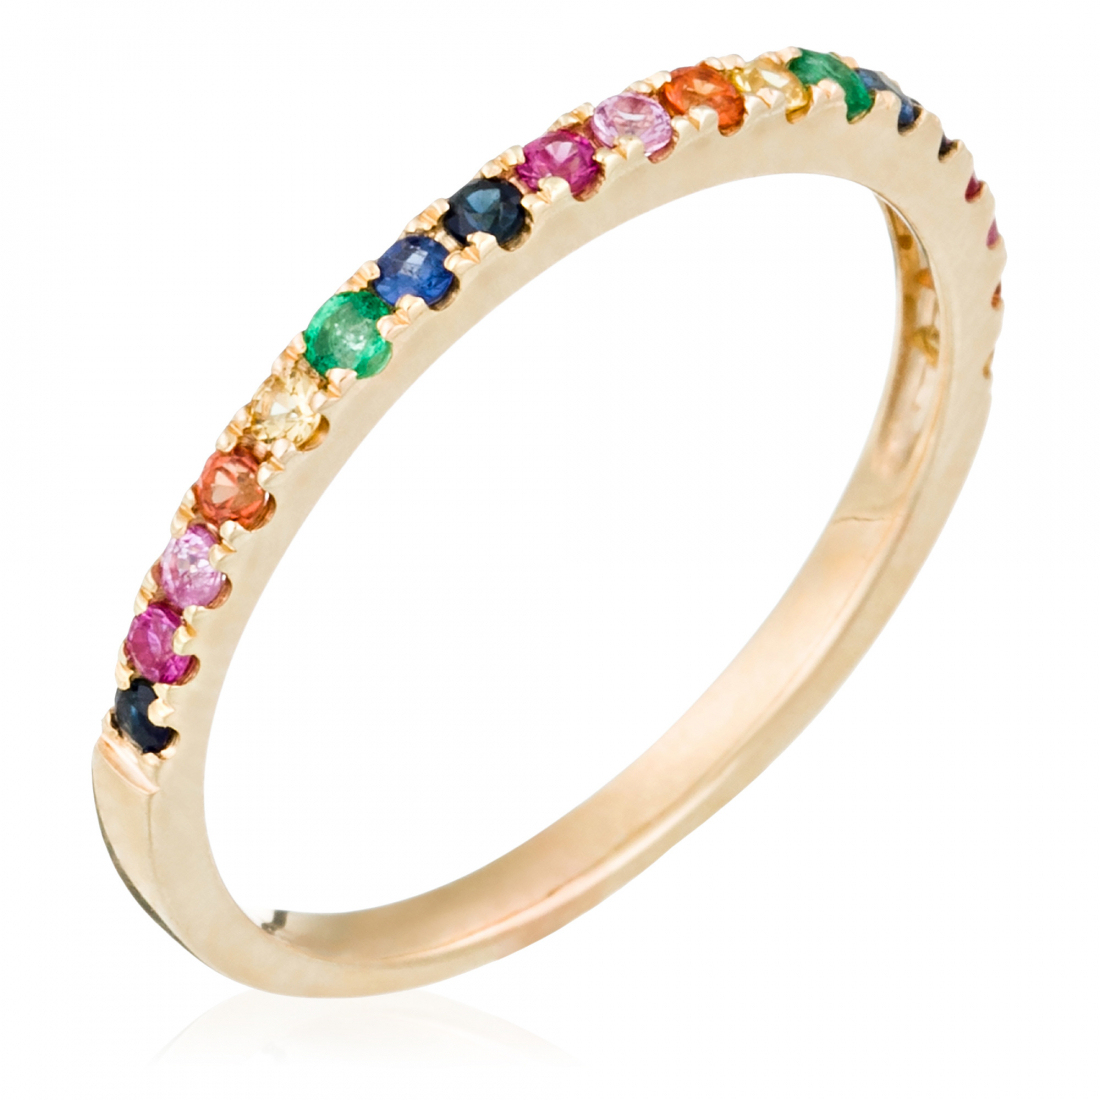 Women's 'Colorful Love' Ring